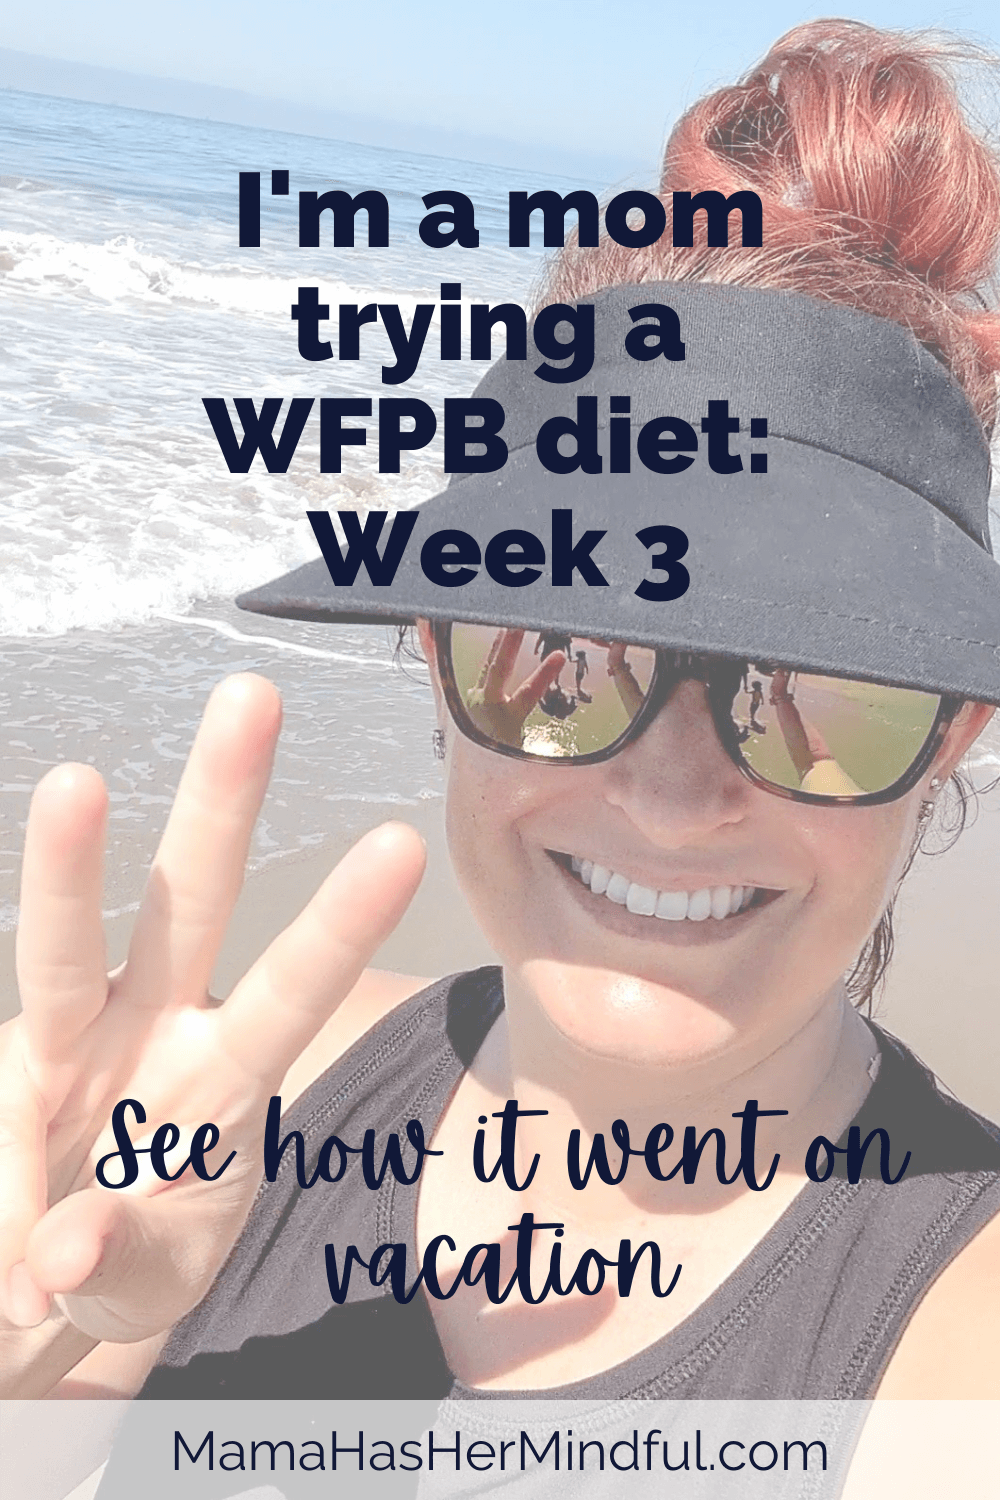 I’m a Mom Trying a Whole-Food, Plant-Based Diet - Here’s How It’s Going: Week 3